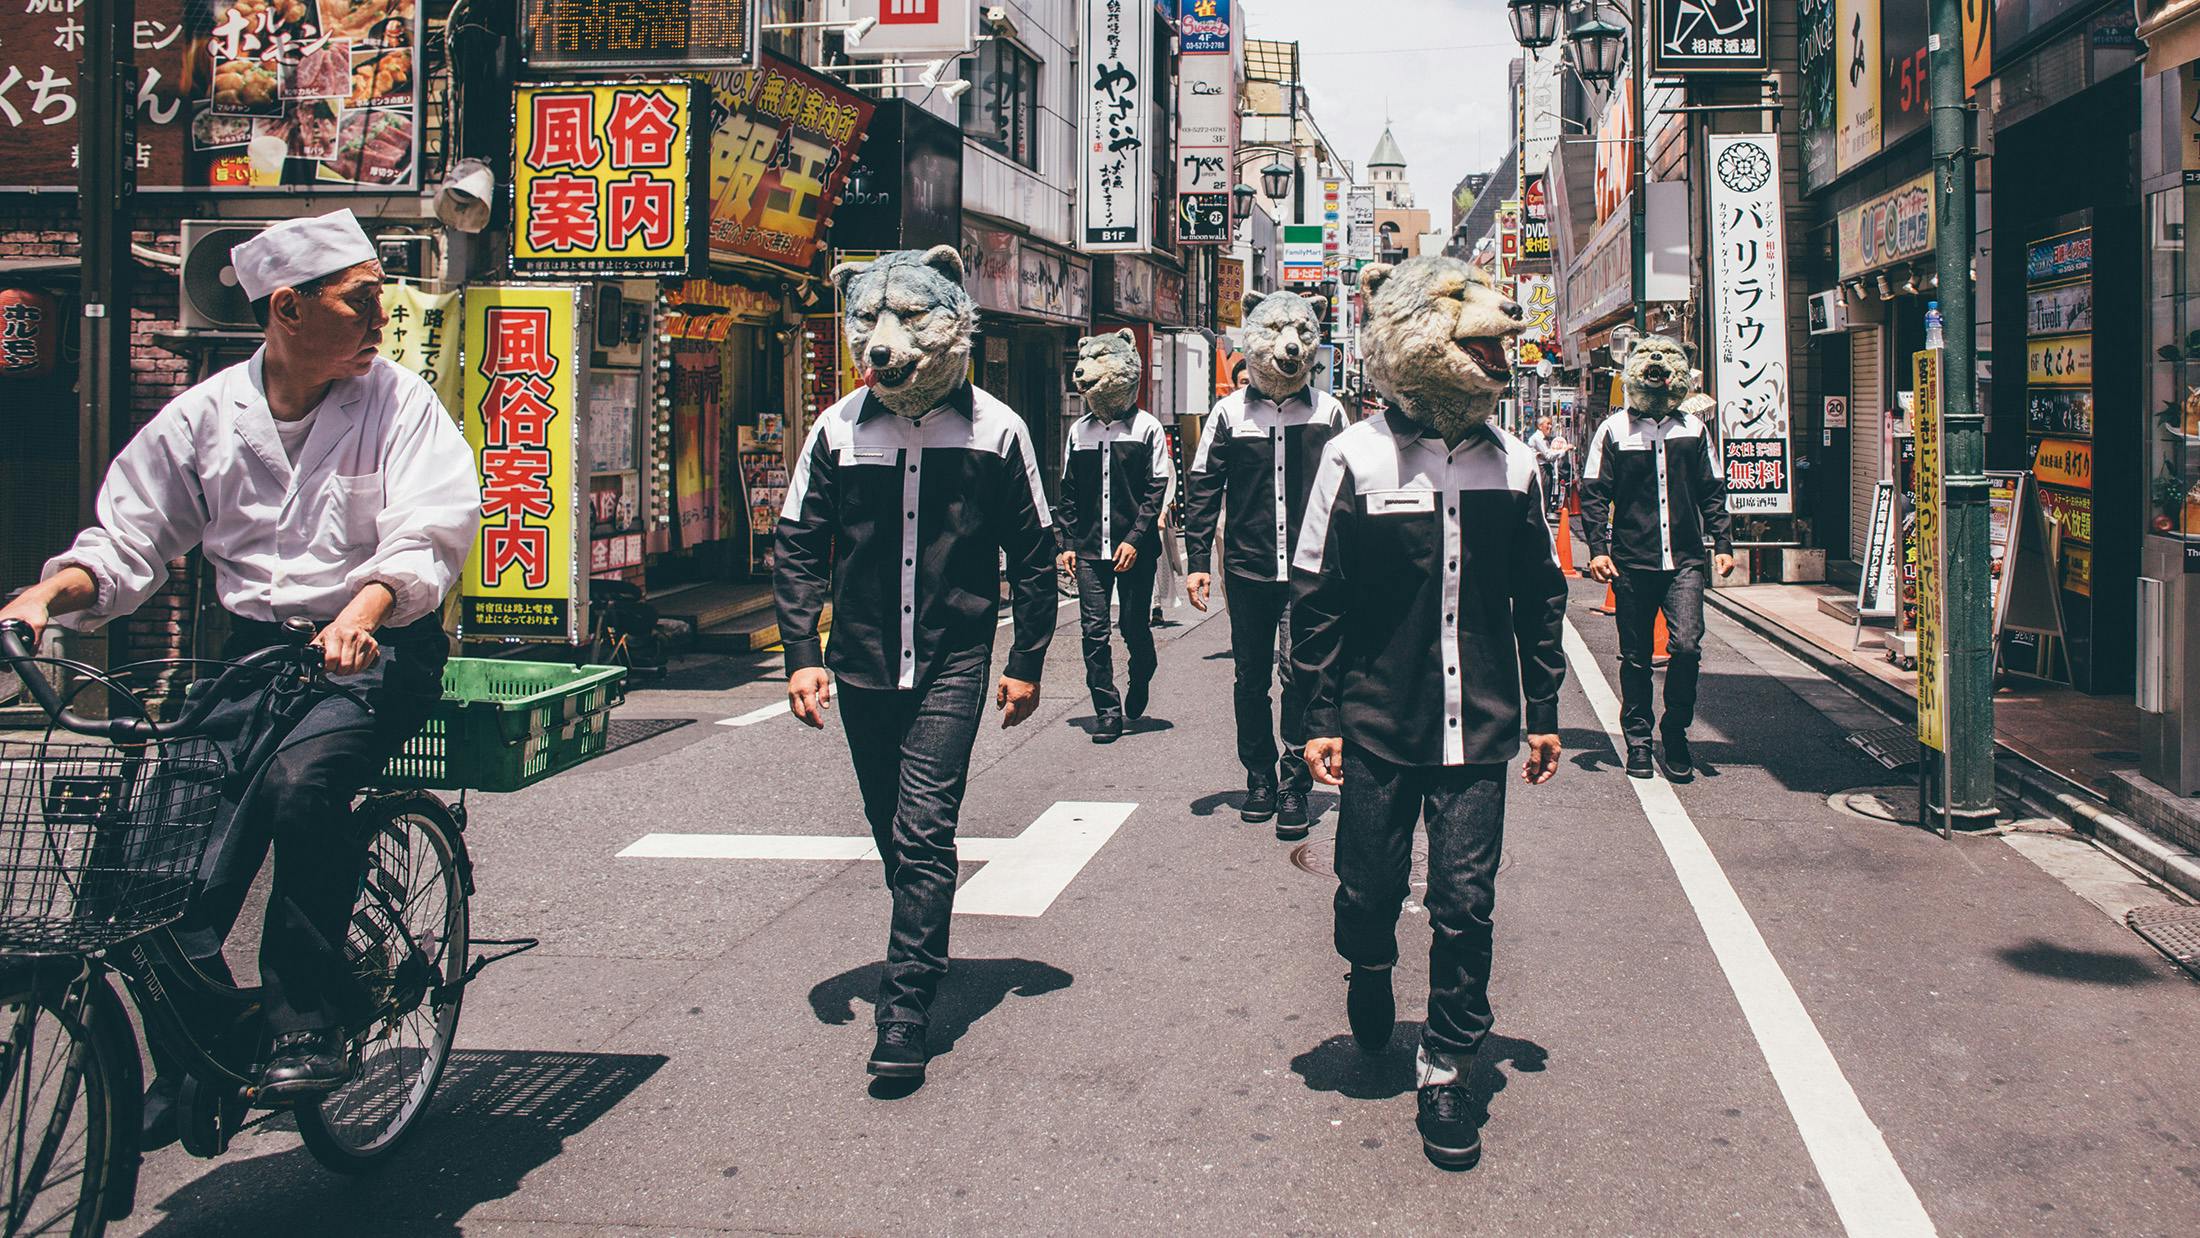 MAN WITH A MISSION: "Artificial Intelligence May Take Over The World by 2045"